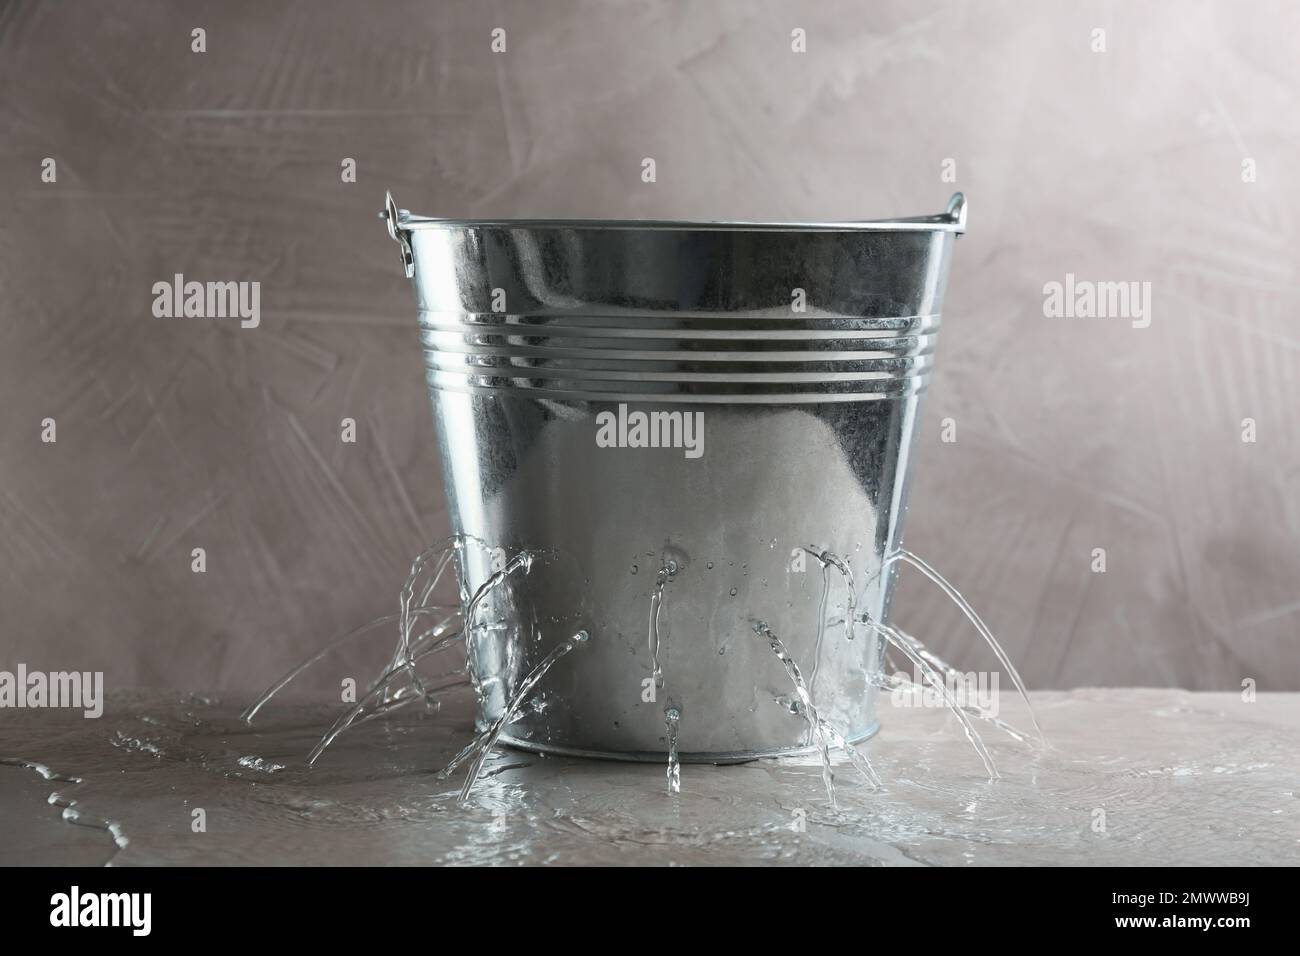 Leaky bucket with water on table against grey background Stock Photo